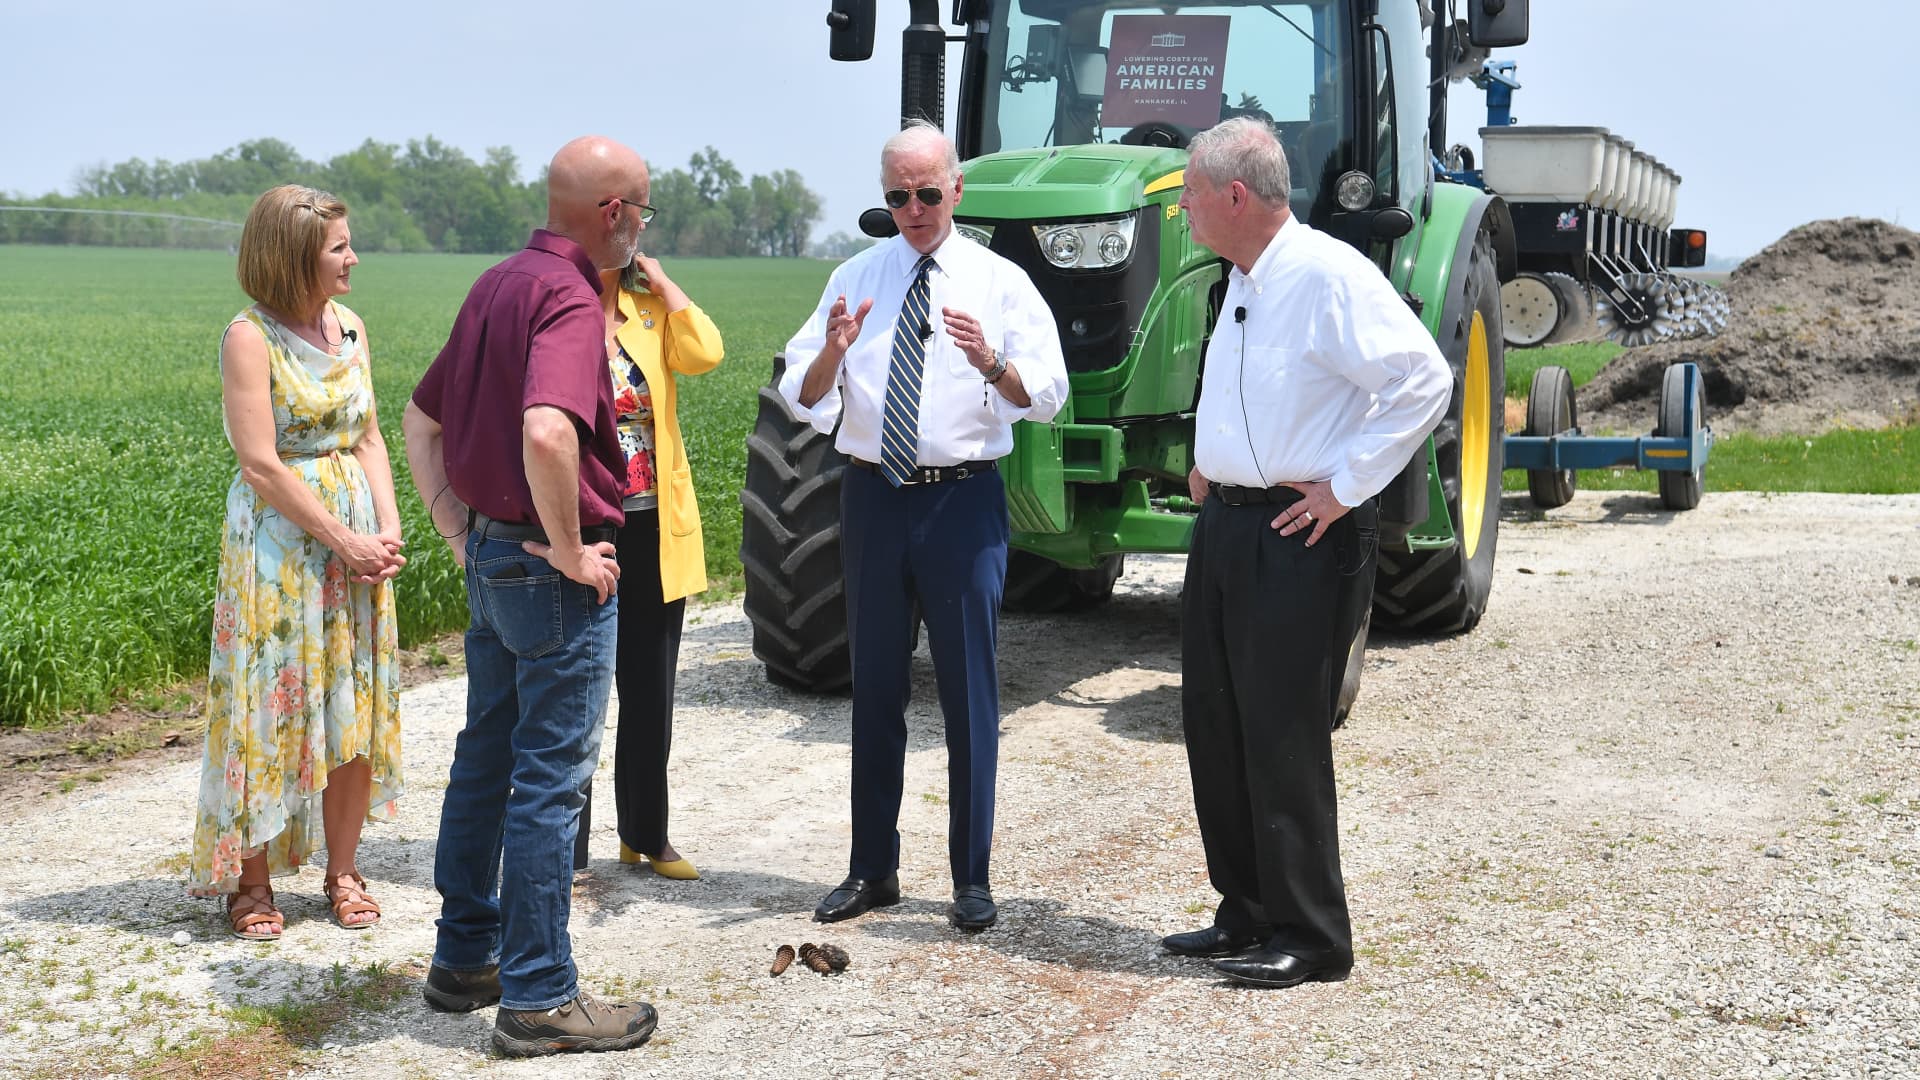 (L-R) Gina and Jeff O'Connor, owners of O'Connor Farms, US President Joe Biden, and US Agriculture Secretary Tom Vilsack speak while visiting O'Connor Farm in Kankakee, Illinois, on May 11, 2022.